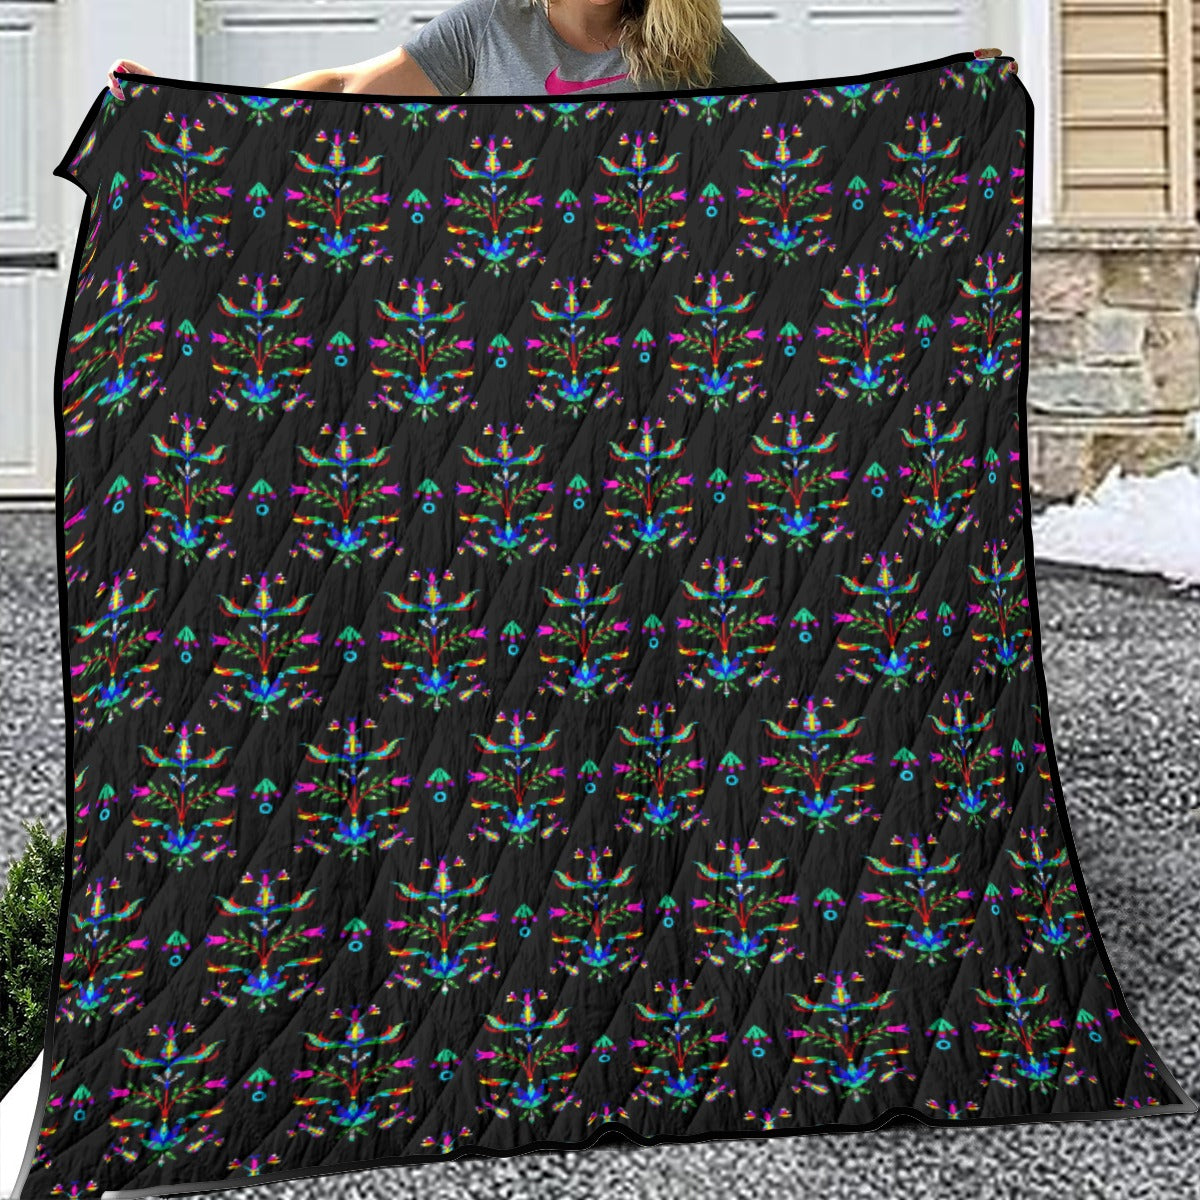 Dakota Damask Black Lightweight & Breathable Quilt With Edge-wrapping Strips